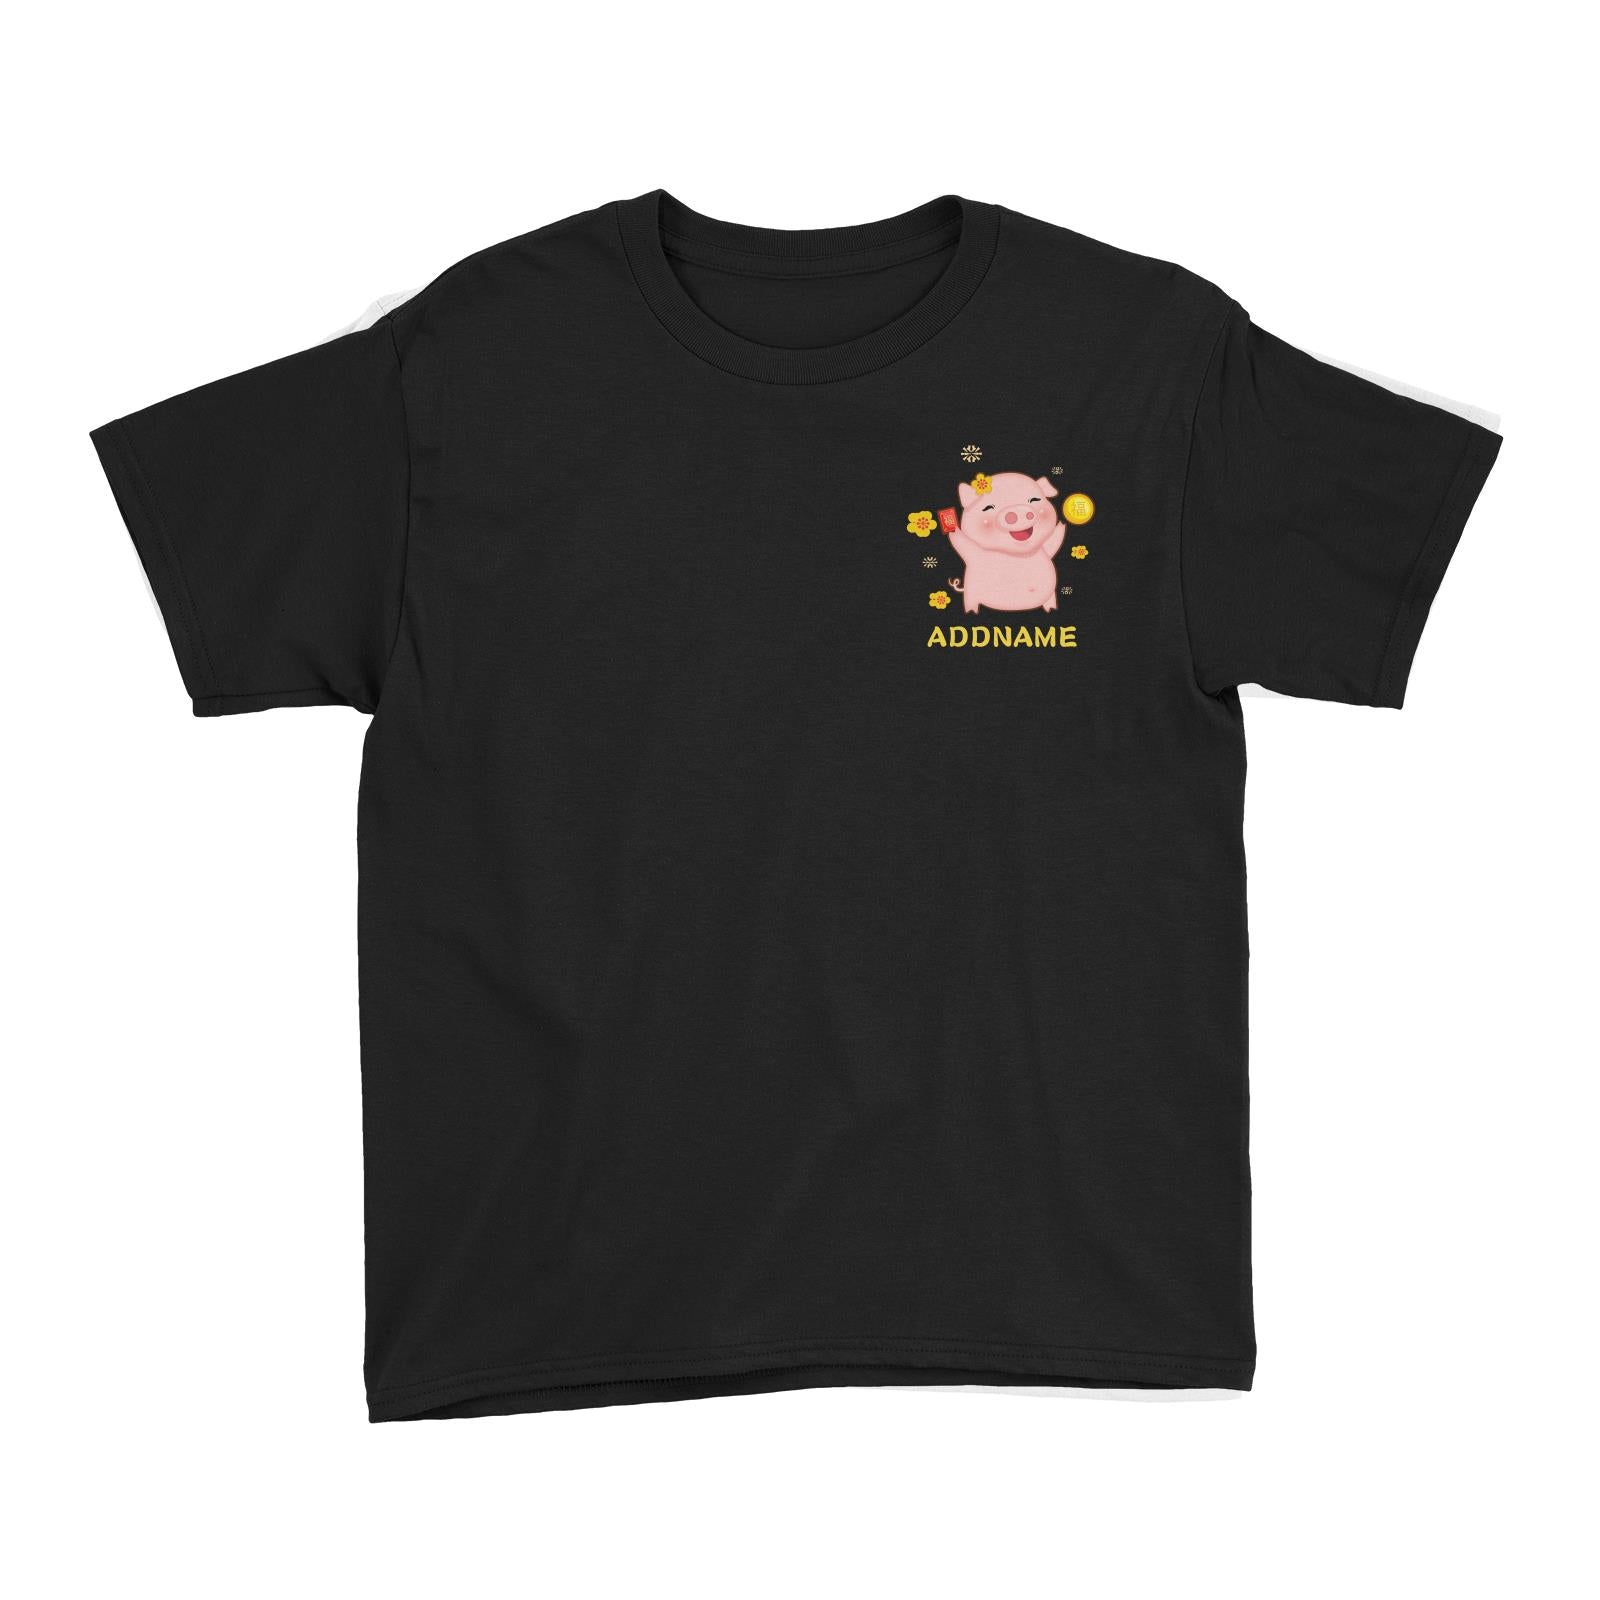 Cute Pig CNY Pig Girl with Red Packet and Happiness Symbol Pocket Design Kid's T-Shirt